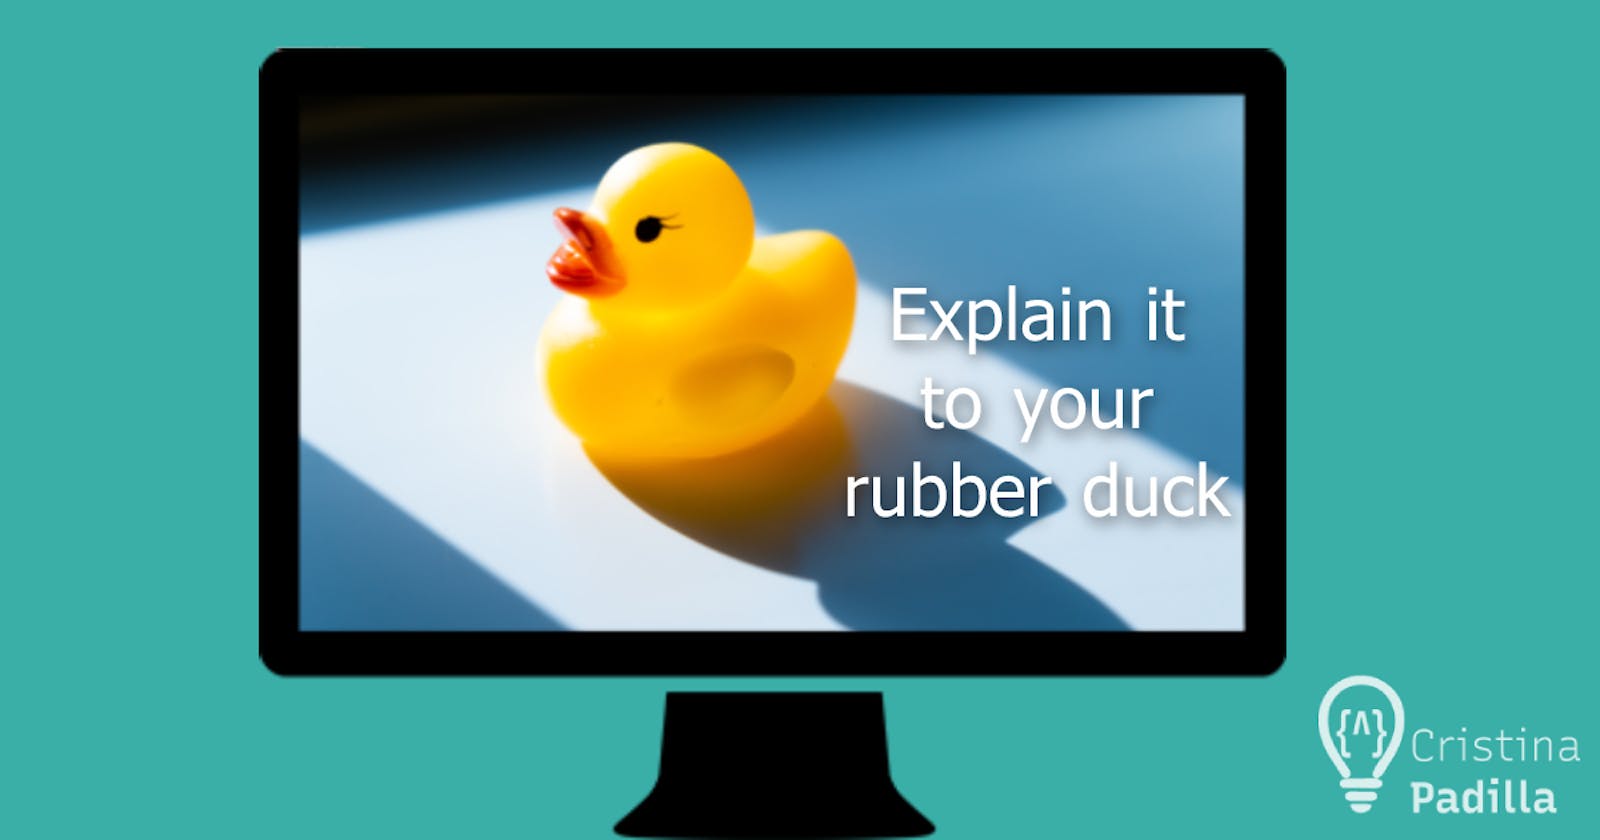 Explain it to your rubber duck